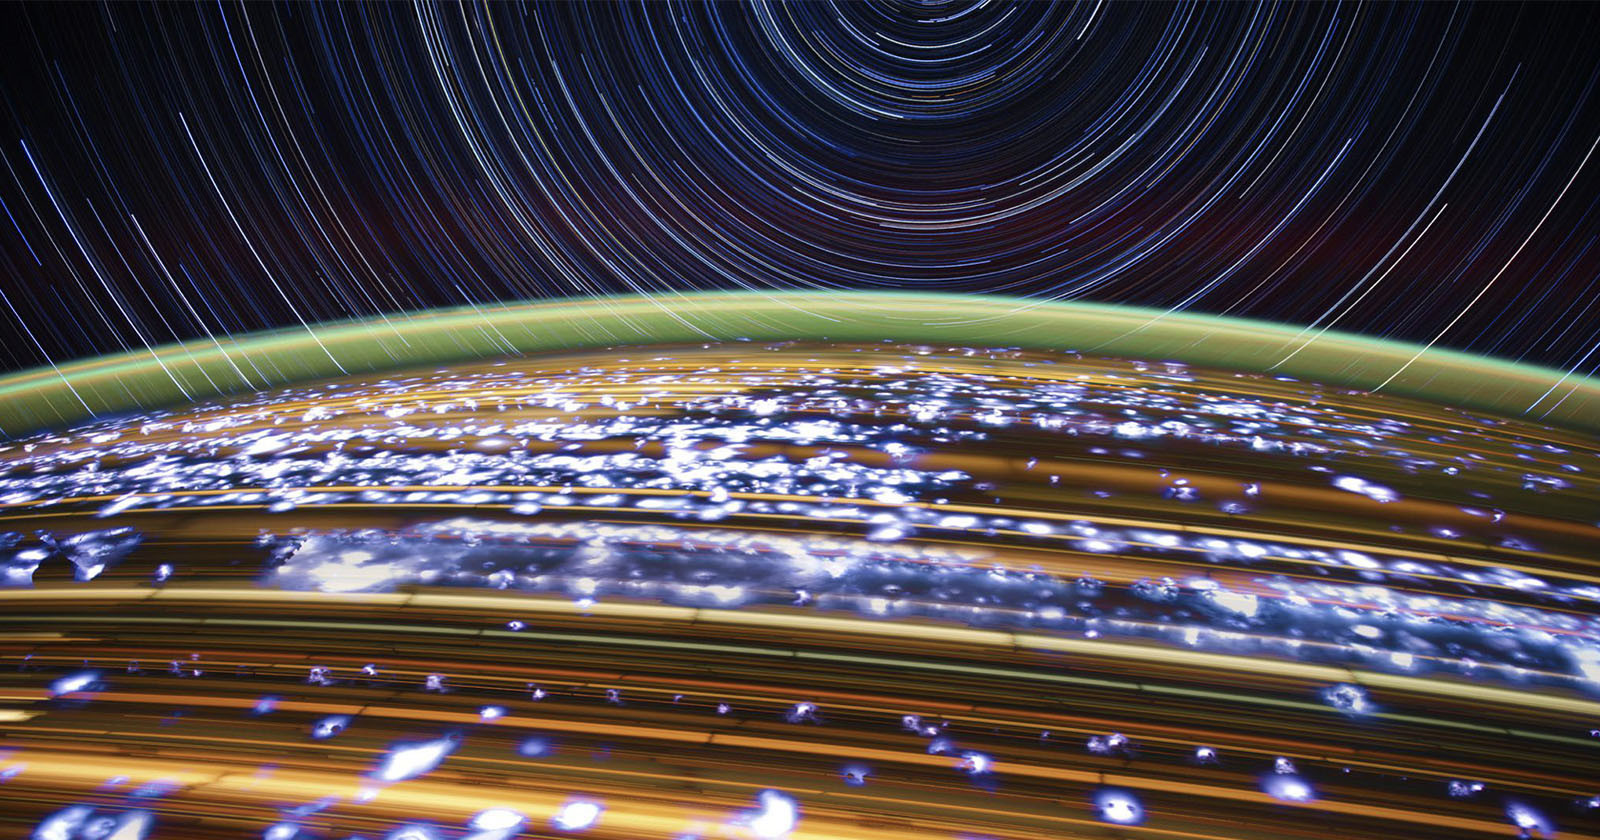 Astronaut Shares Incredible Star Trail and Lightning Photo Taken From ISS